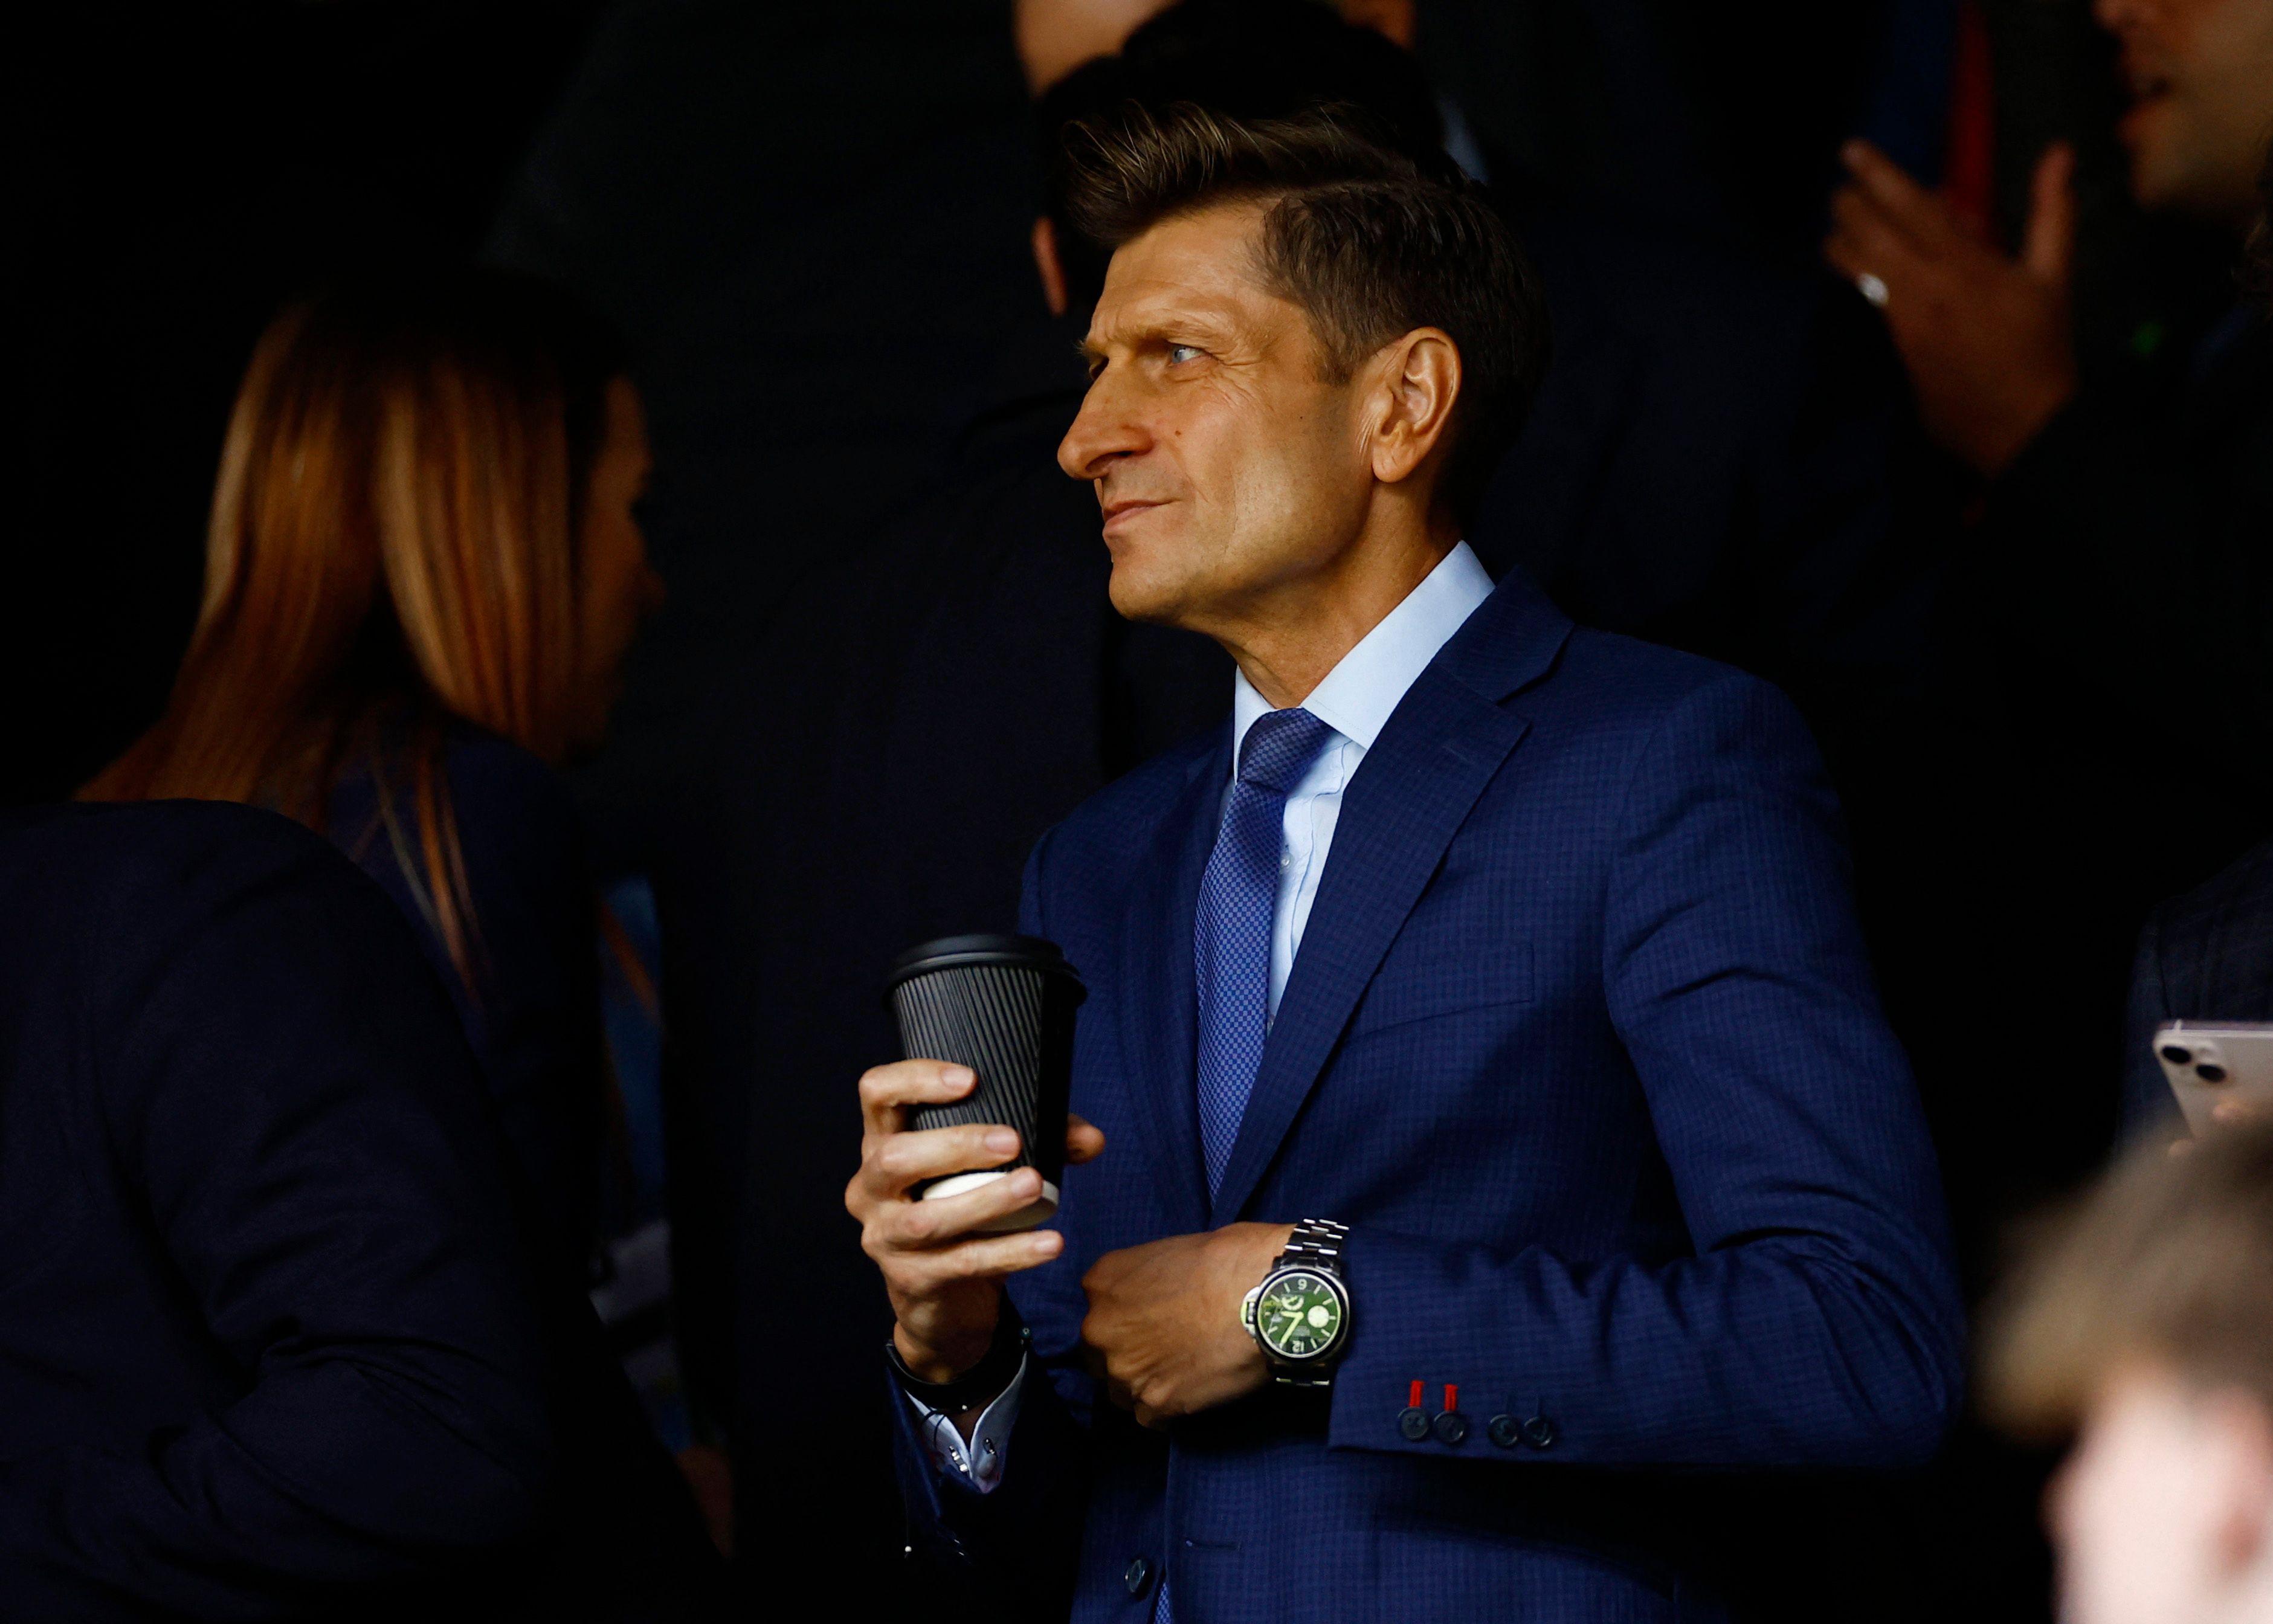 Crystal Palace chairman Steve Parish in the stands at Selhurst Park